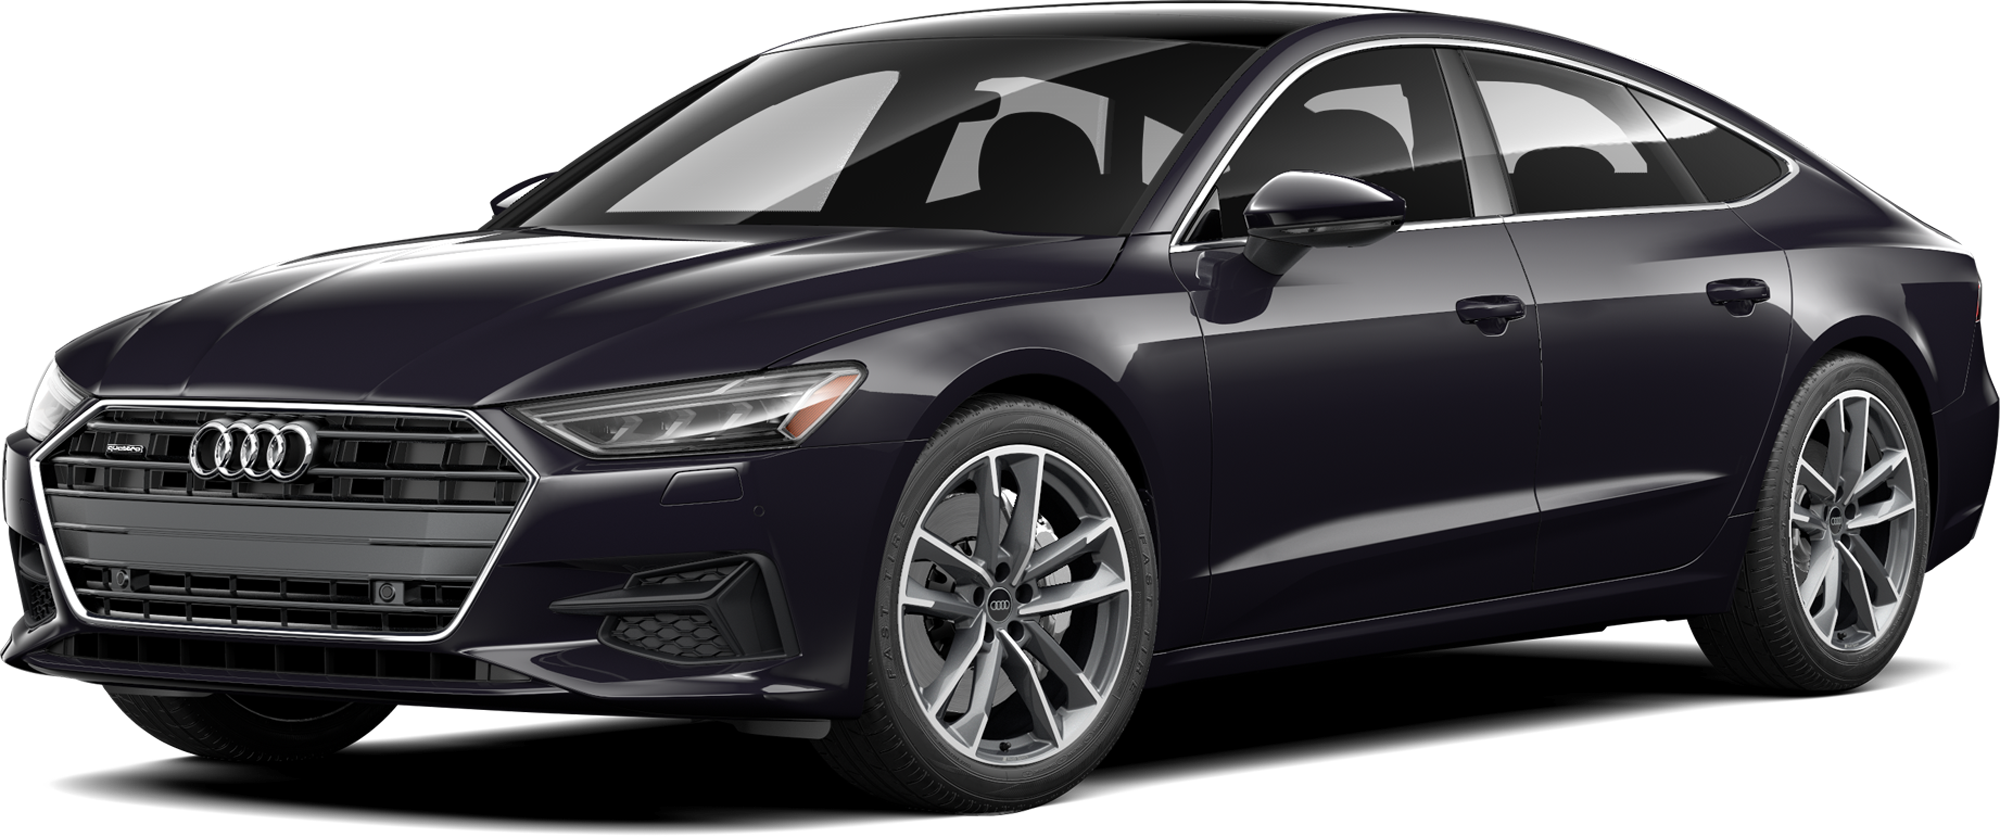 2022 Audi A7 Incentives, Specials & Offers in Charlotte NC